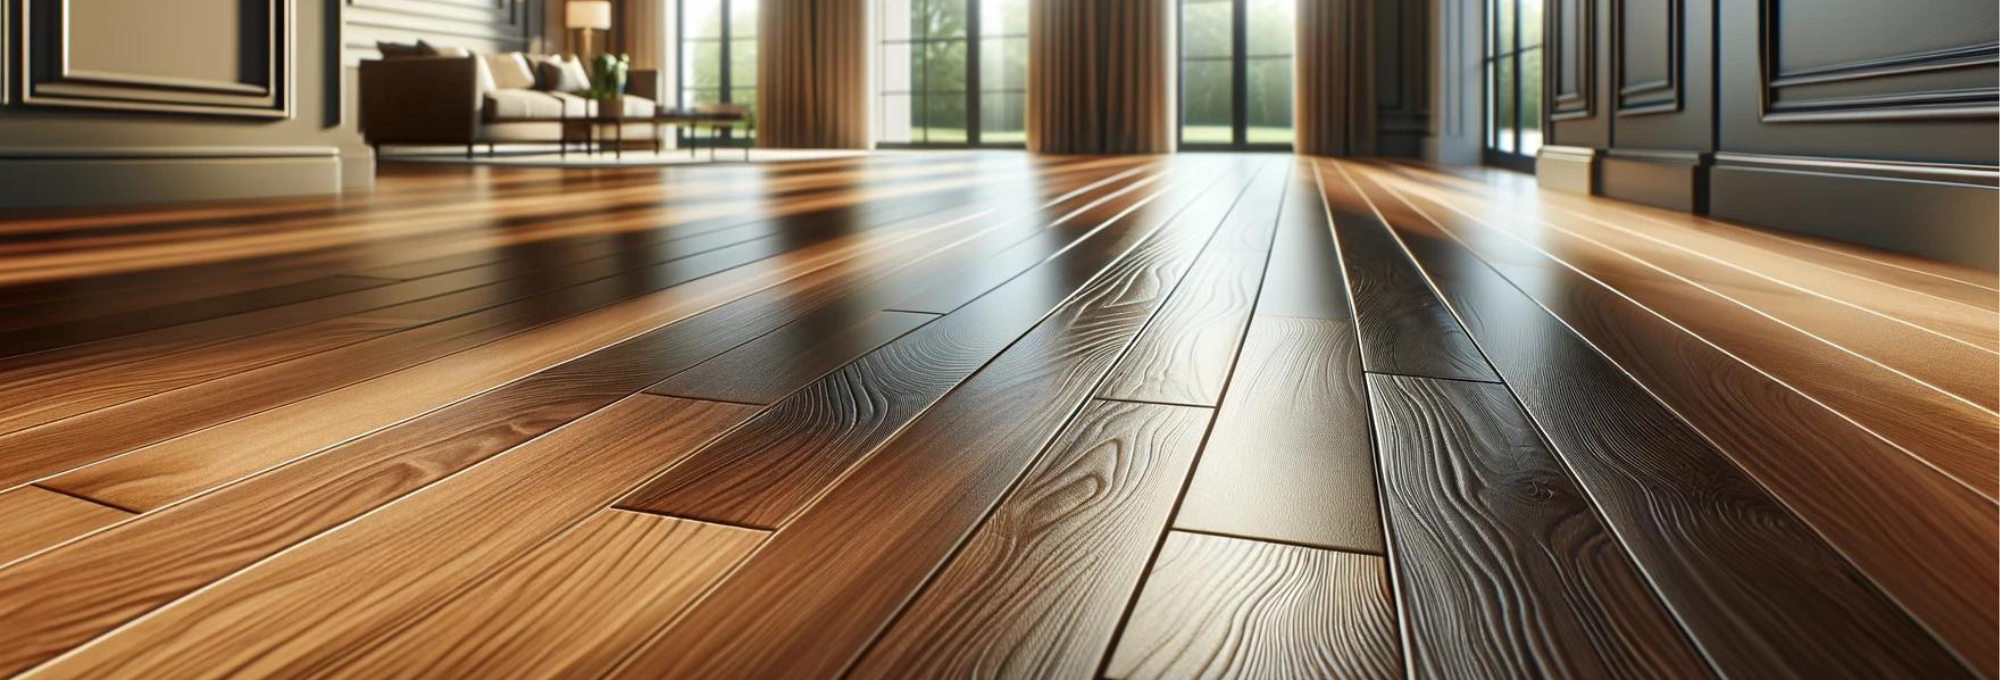 Shop Flooring Products from GoGo Floors in Columbus